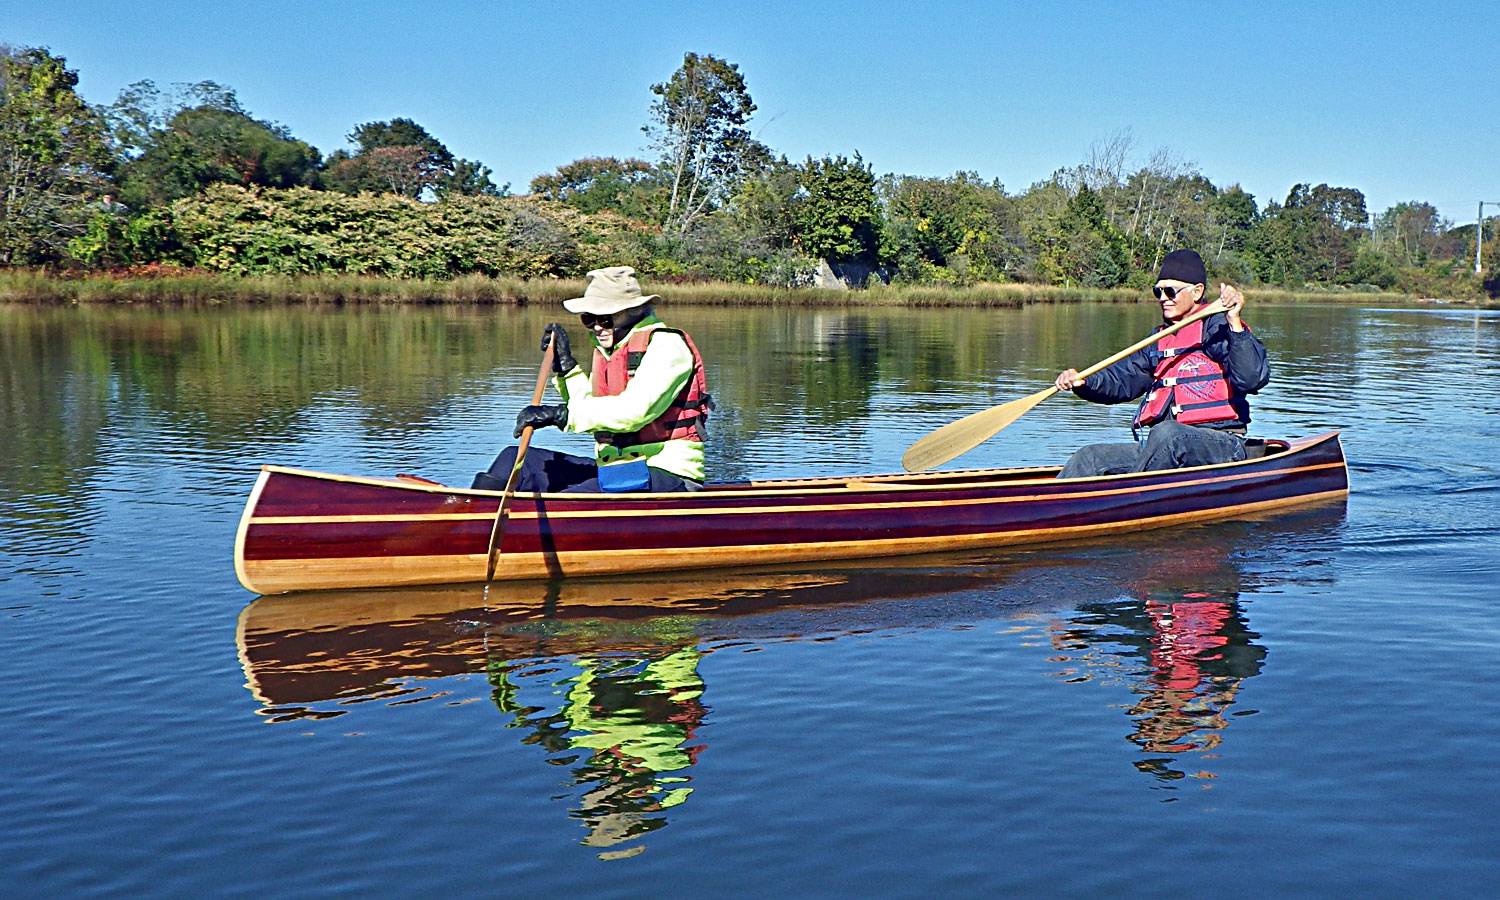 The Mystic River canoe is a traditional wood-strip tandem canoe for 